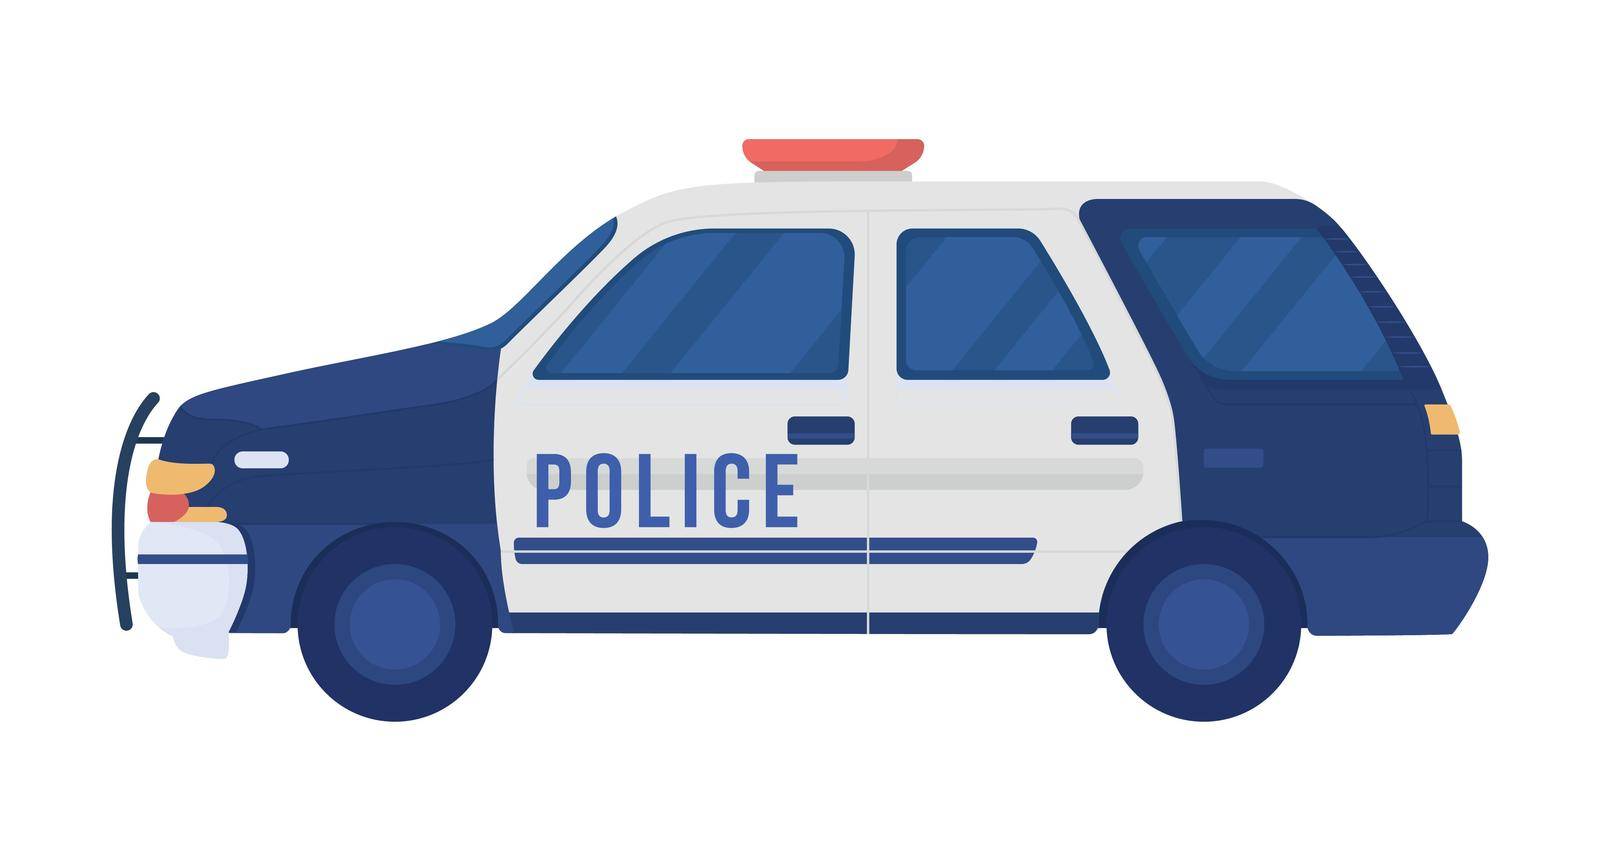 Police car semi flat color vector object by ntl